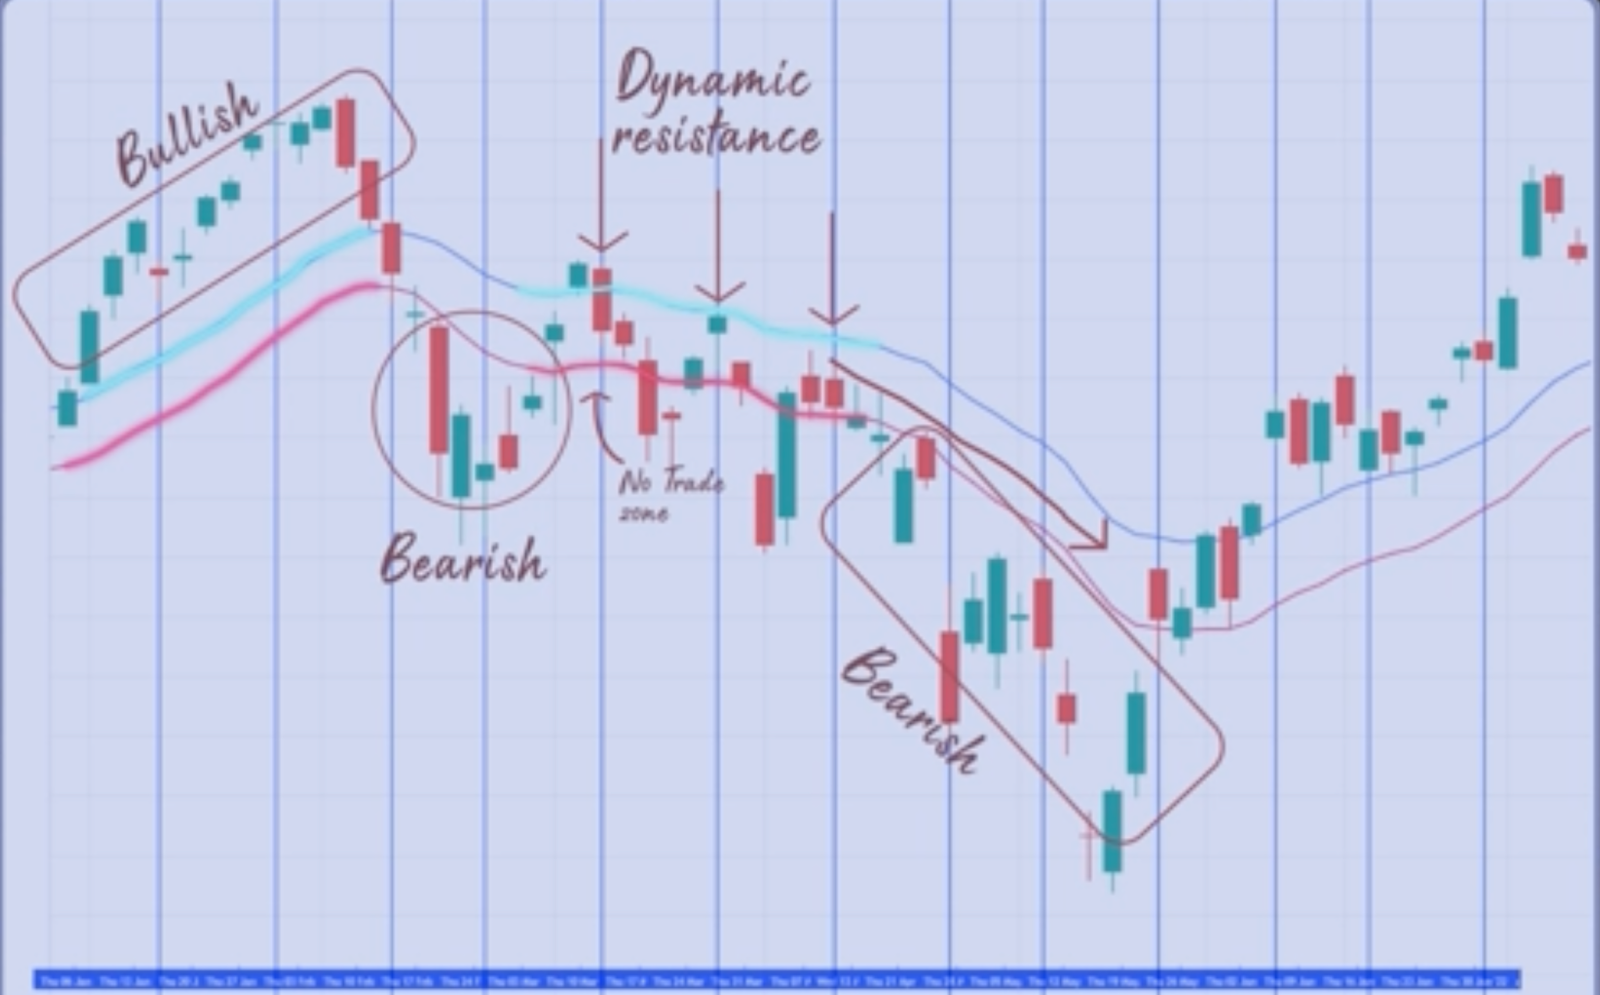 Bullish and bearish trends spotted on the Nifty chart